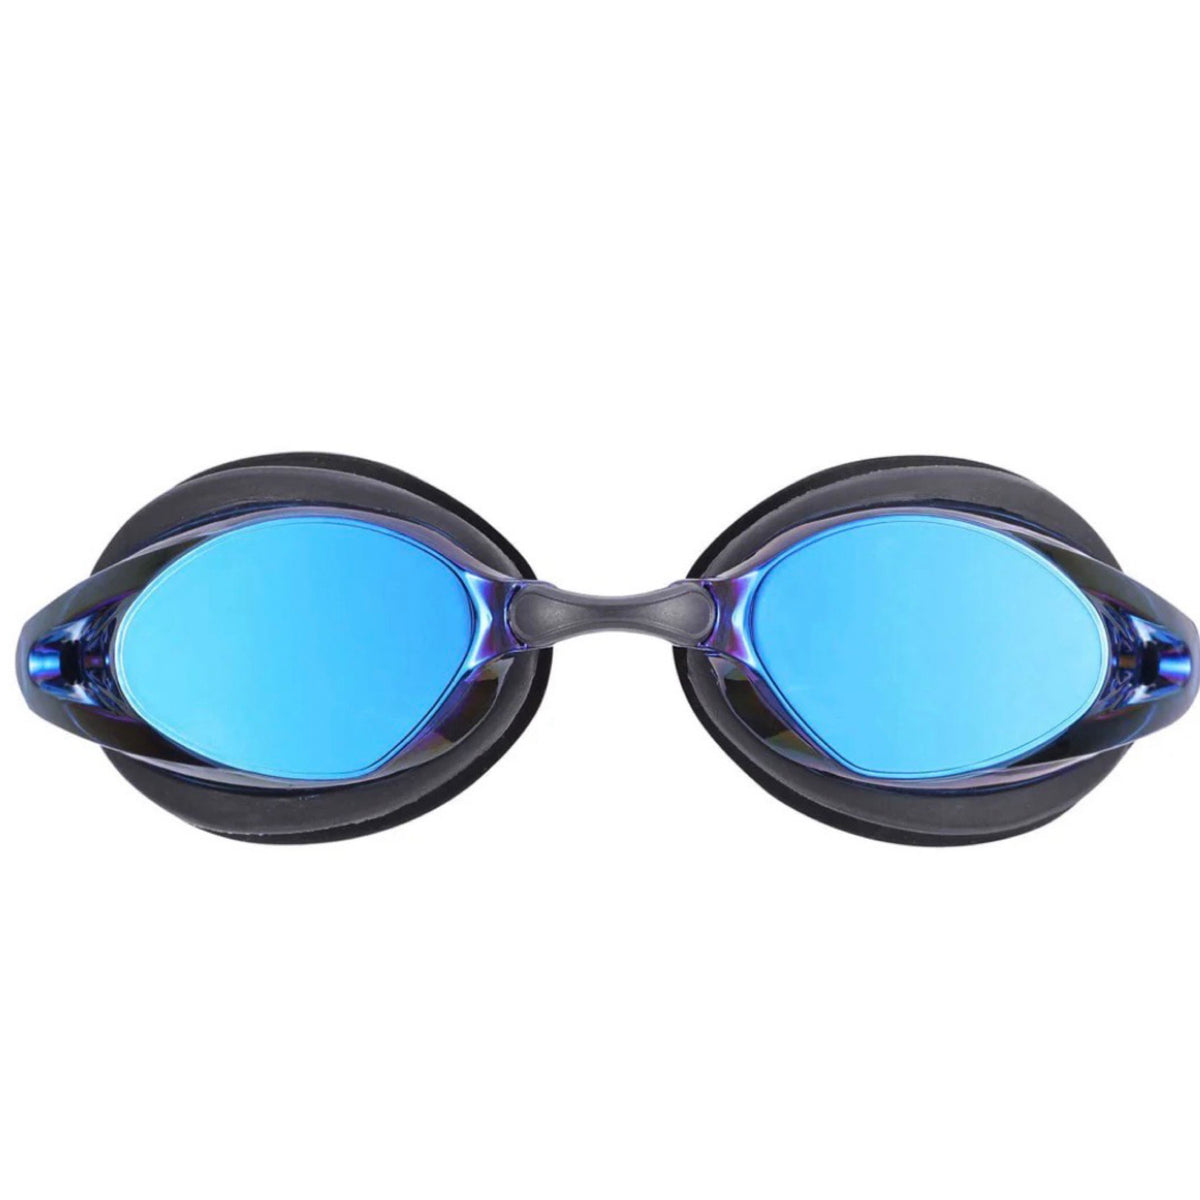 U.S. Divers Unisex Adult Express Mirror Goggles - Anti-Fog & Shatter Resistant